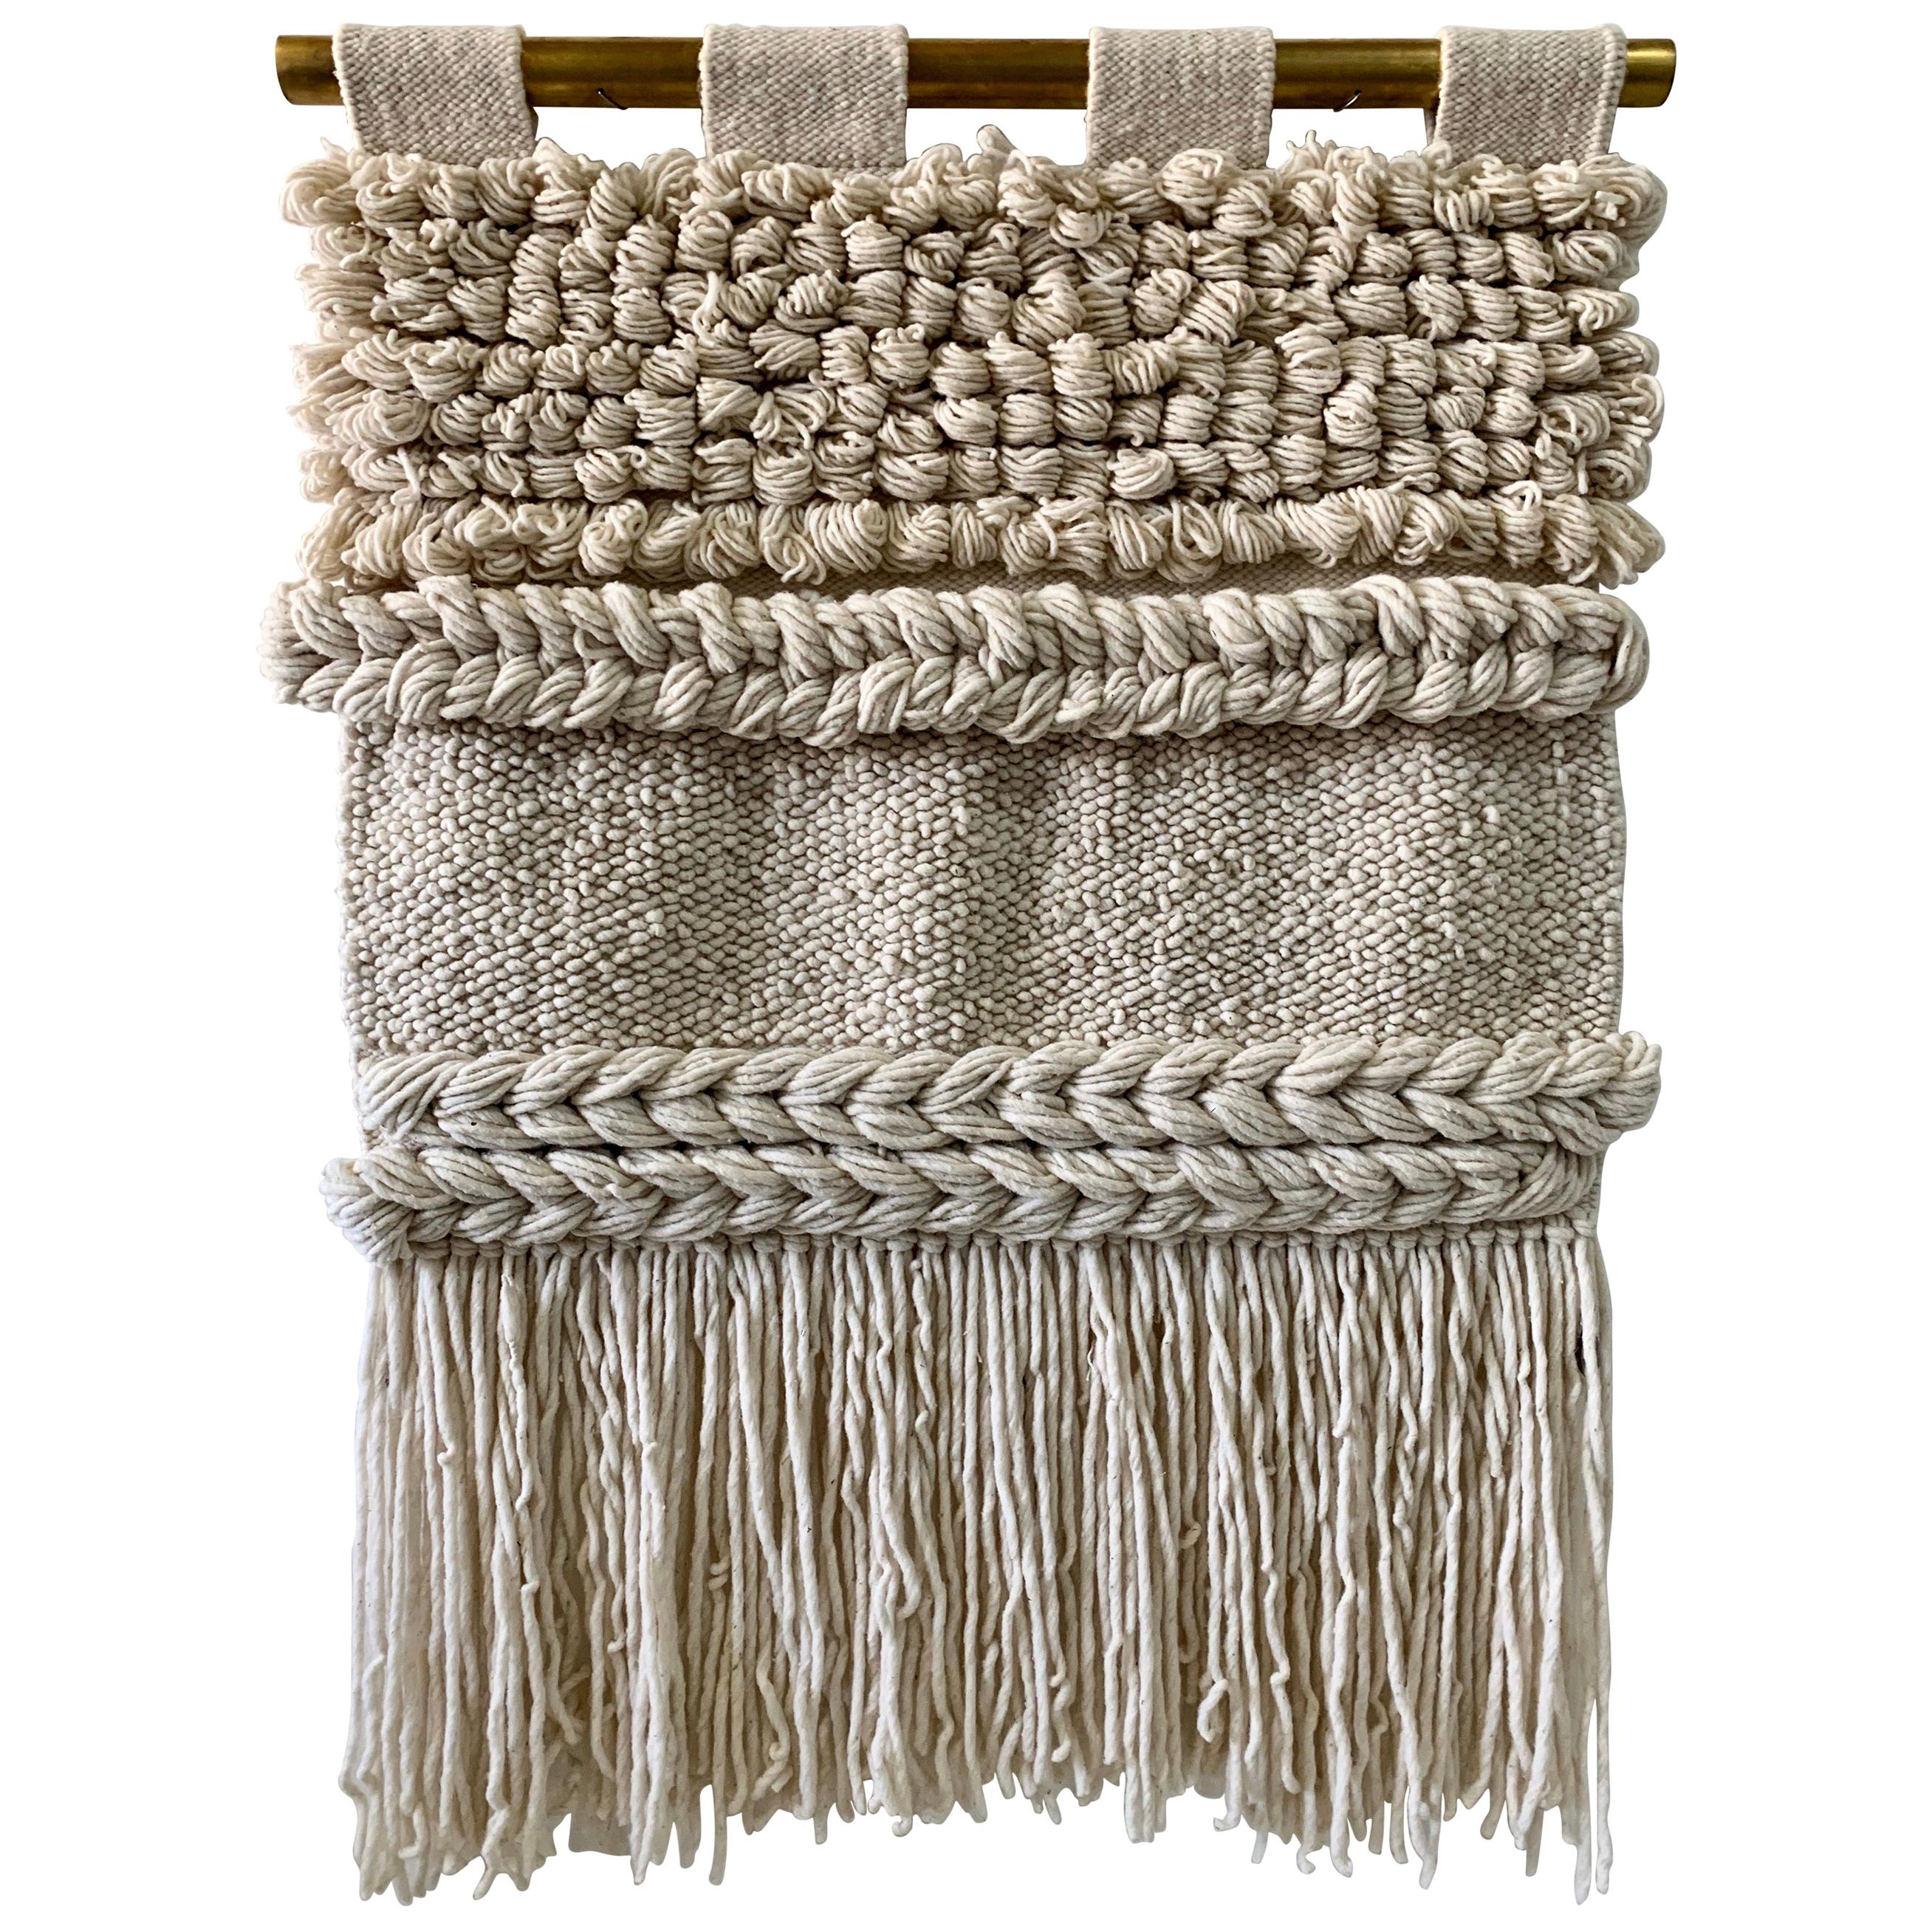 100% Natural Handwoven Wool Tapestry